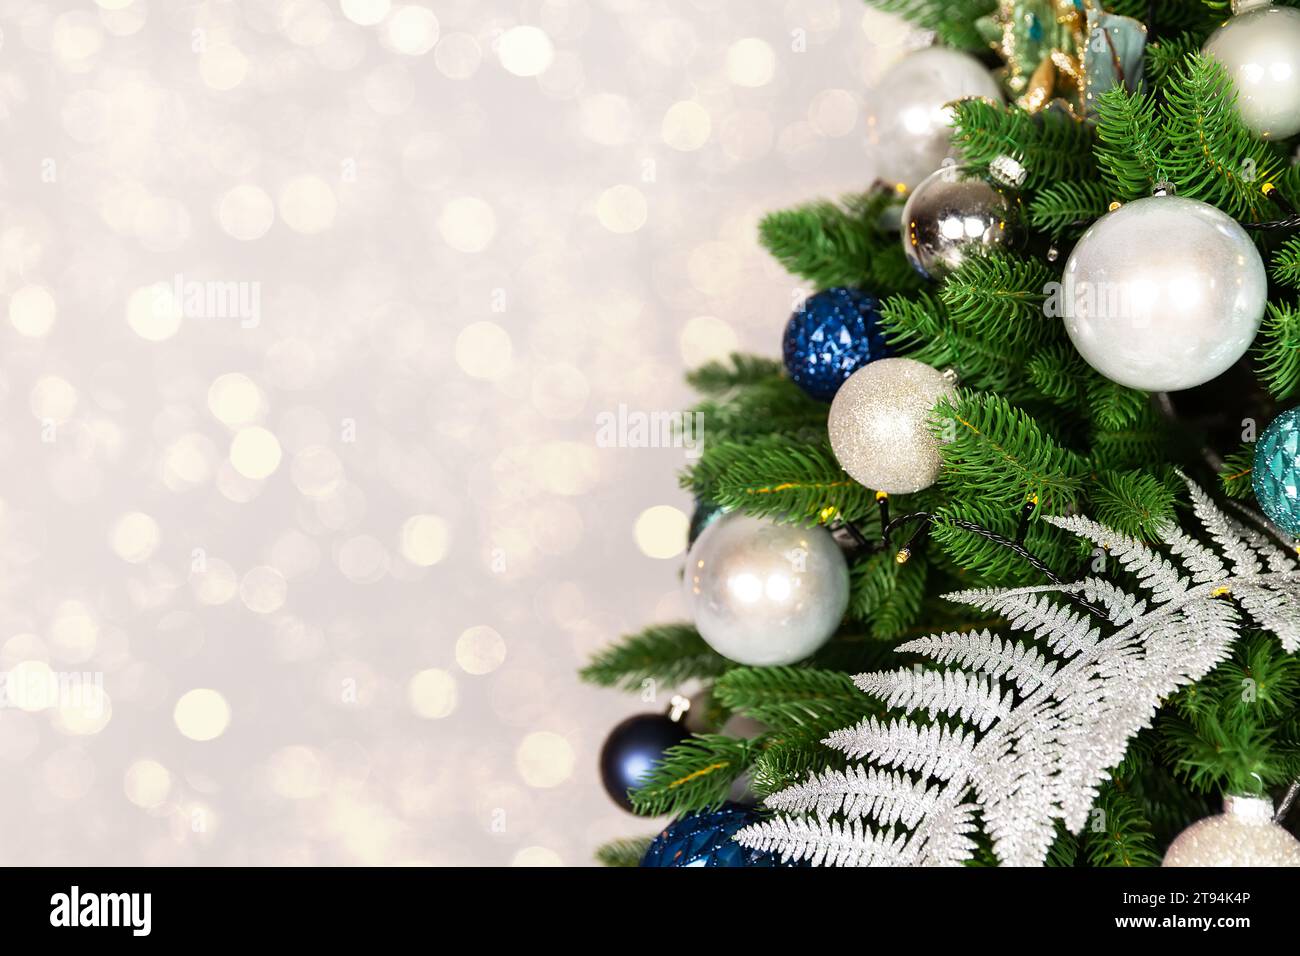 Holiday Christmas tree with ornaments and balls on golden background with bokeh lights. Merry Christmas and a happy New Year greeting card. Winter hol Stock Photo